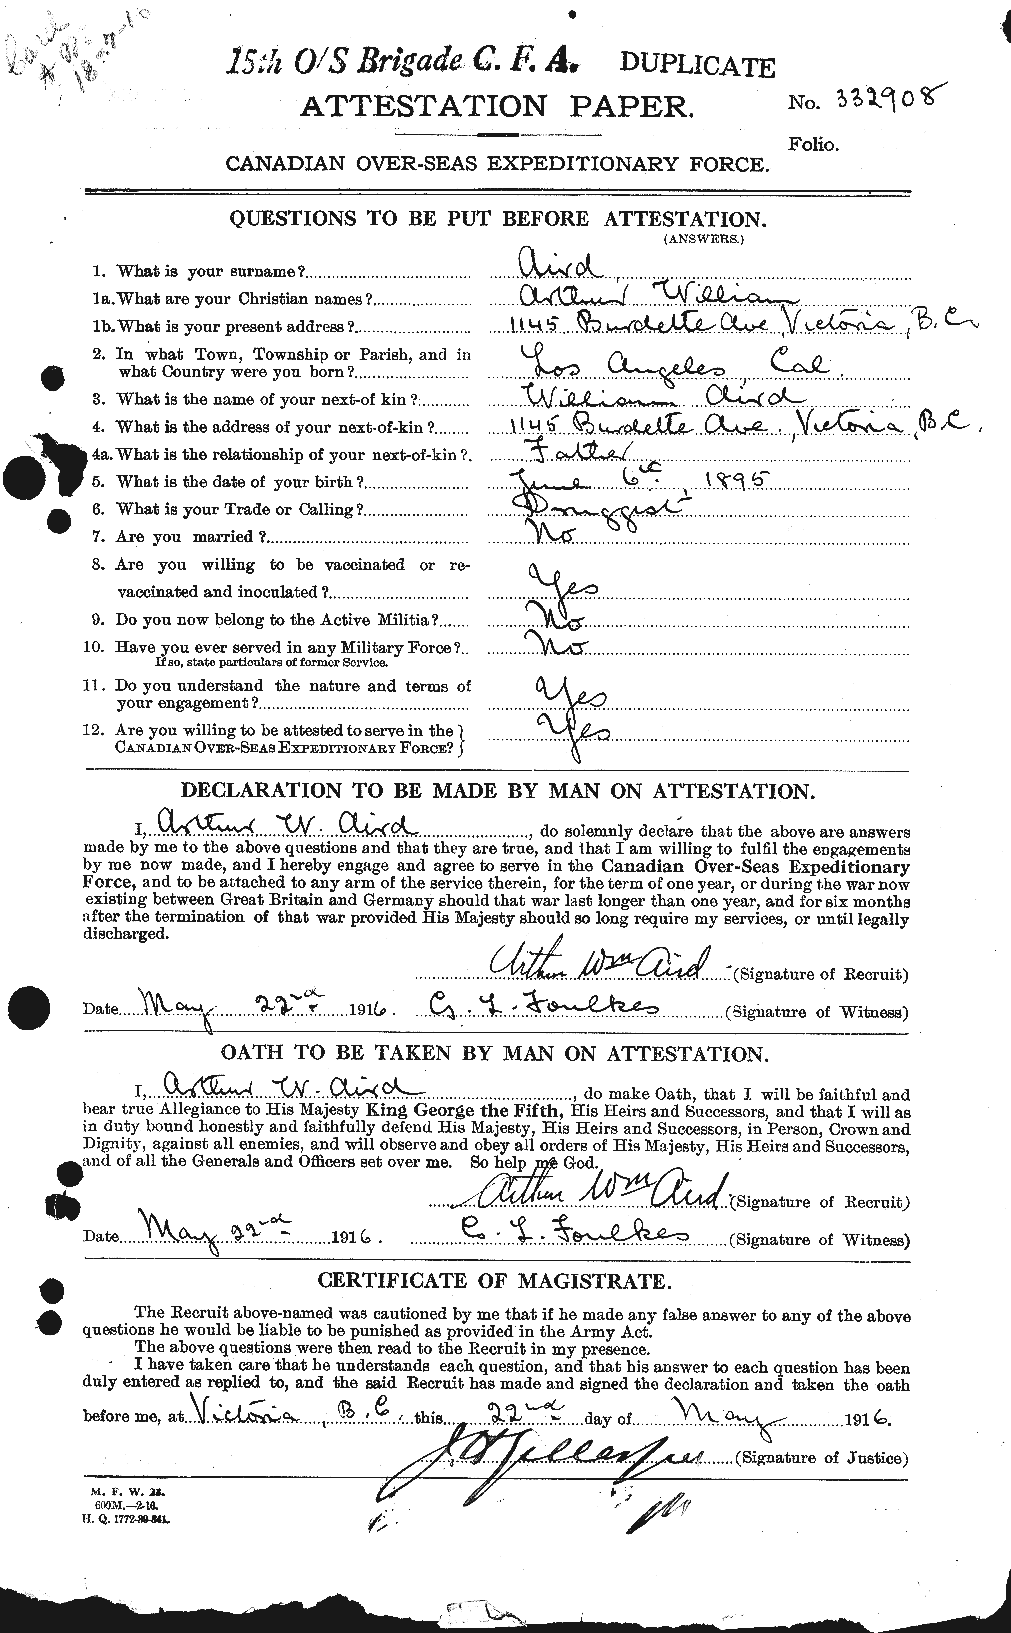 Personnel Records of the First World War - CEF 203013a